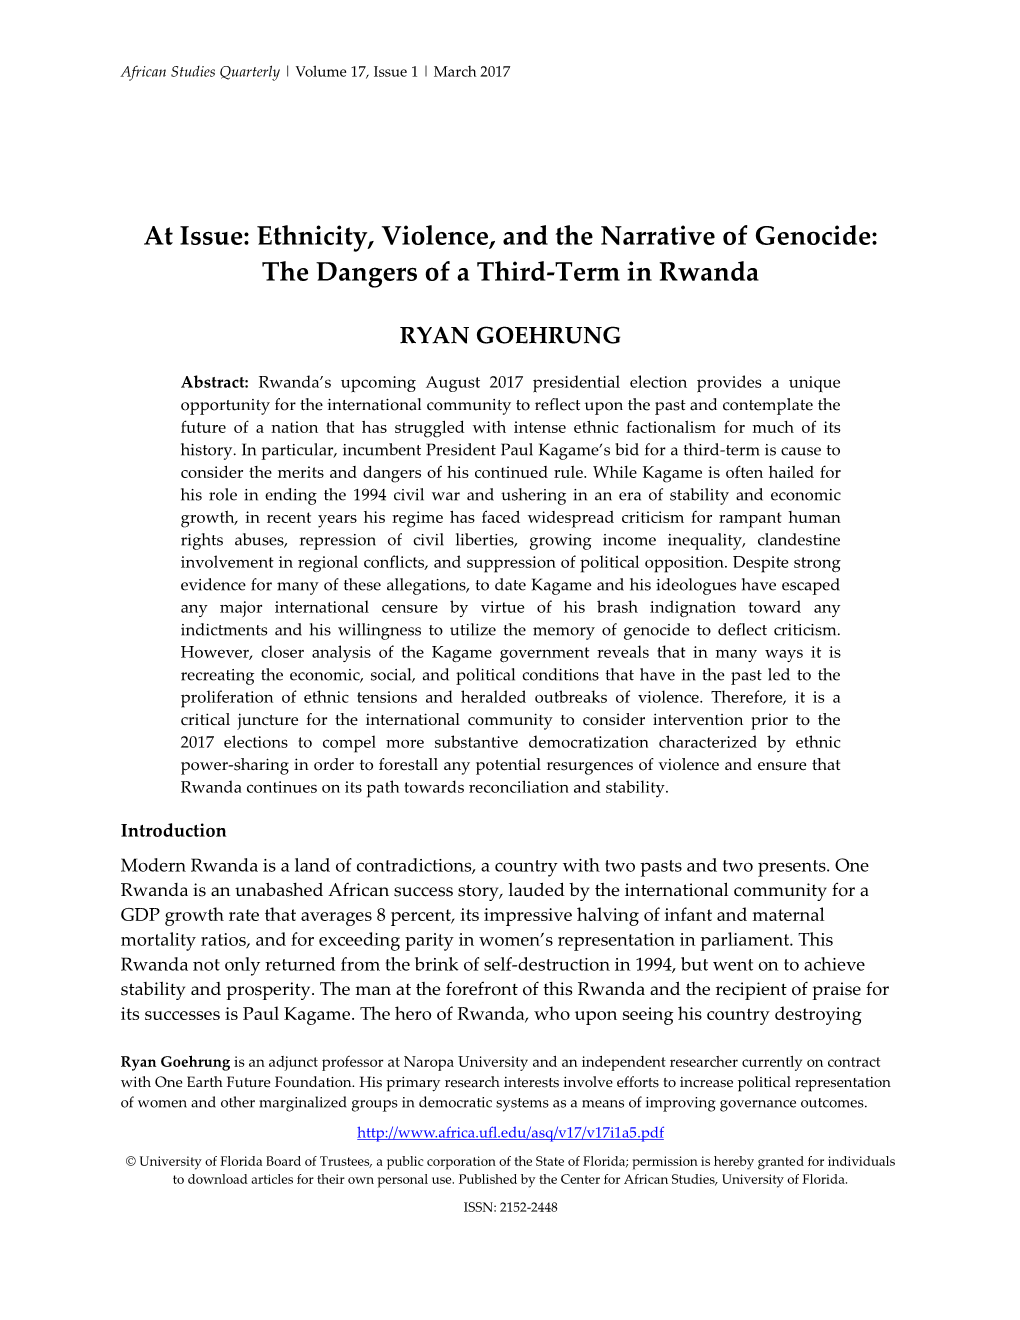 Ethnicity, Violence, and the Narrative of Genocide: the Dangers of a Third-Term in Rwanda